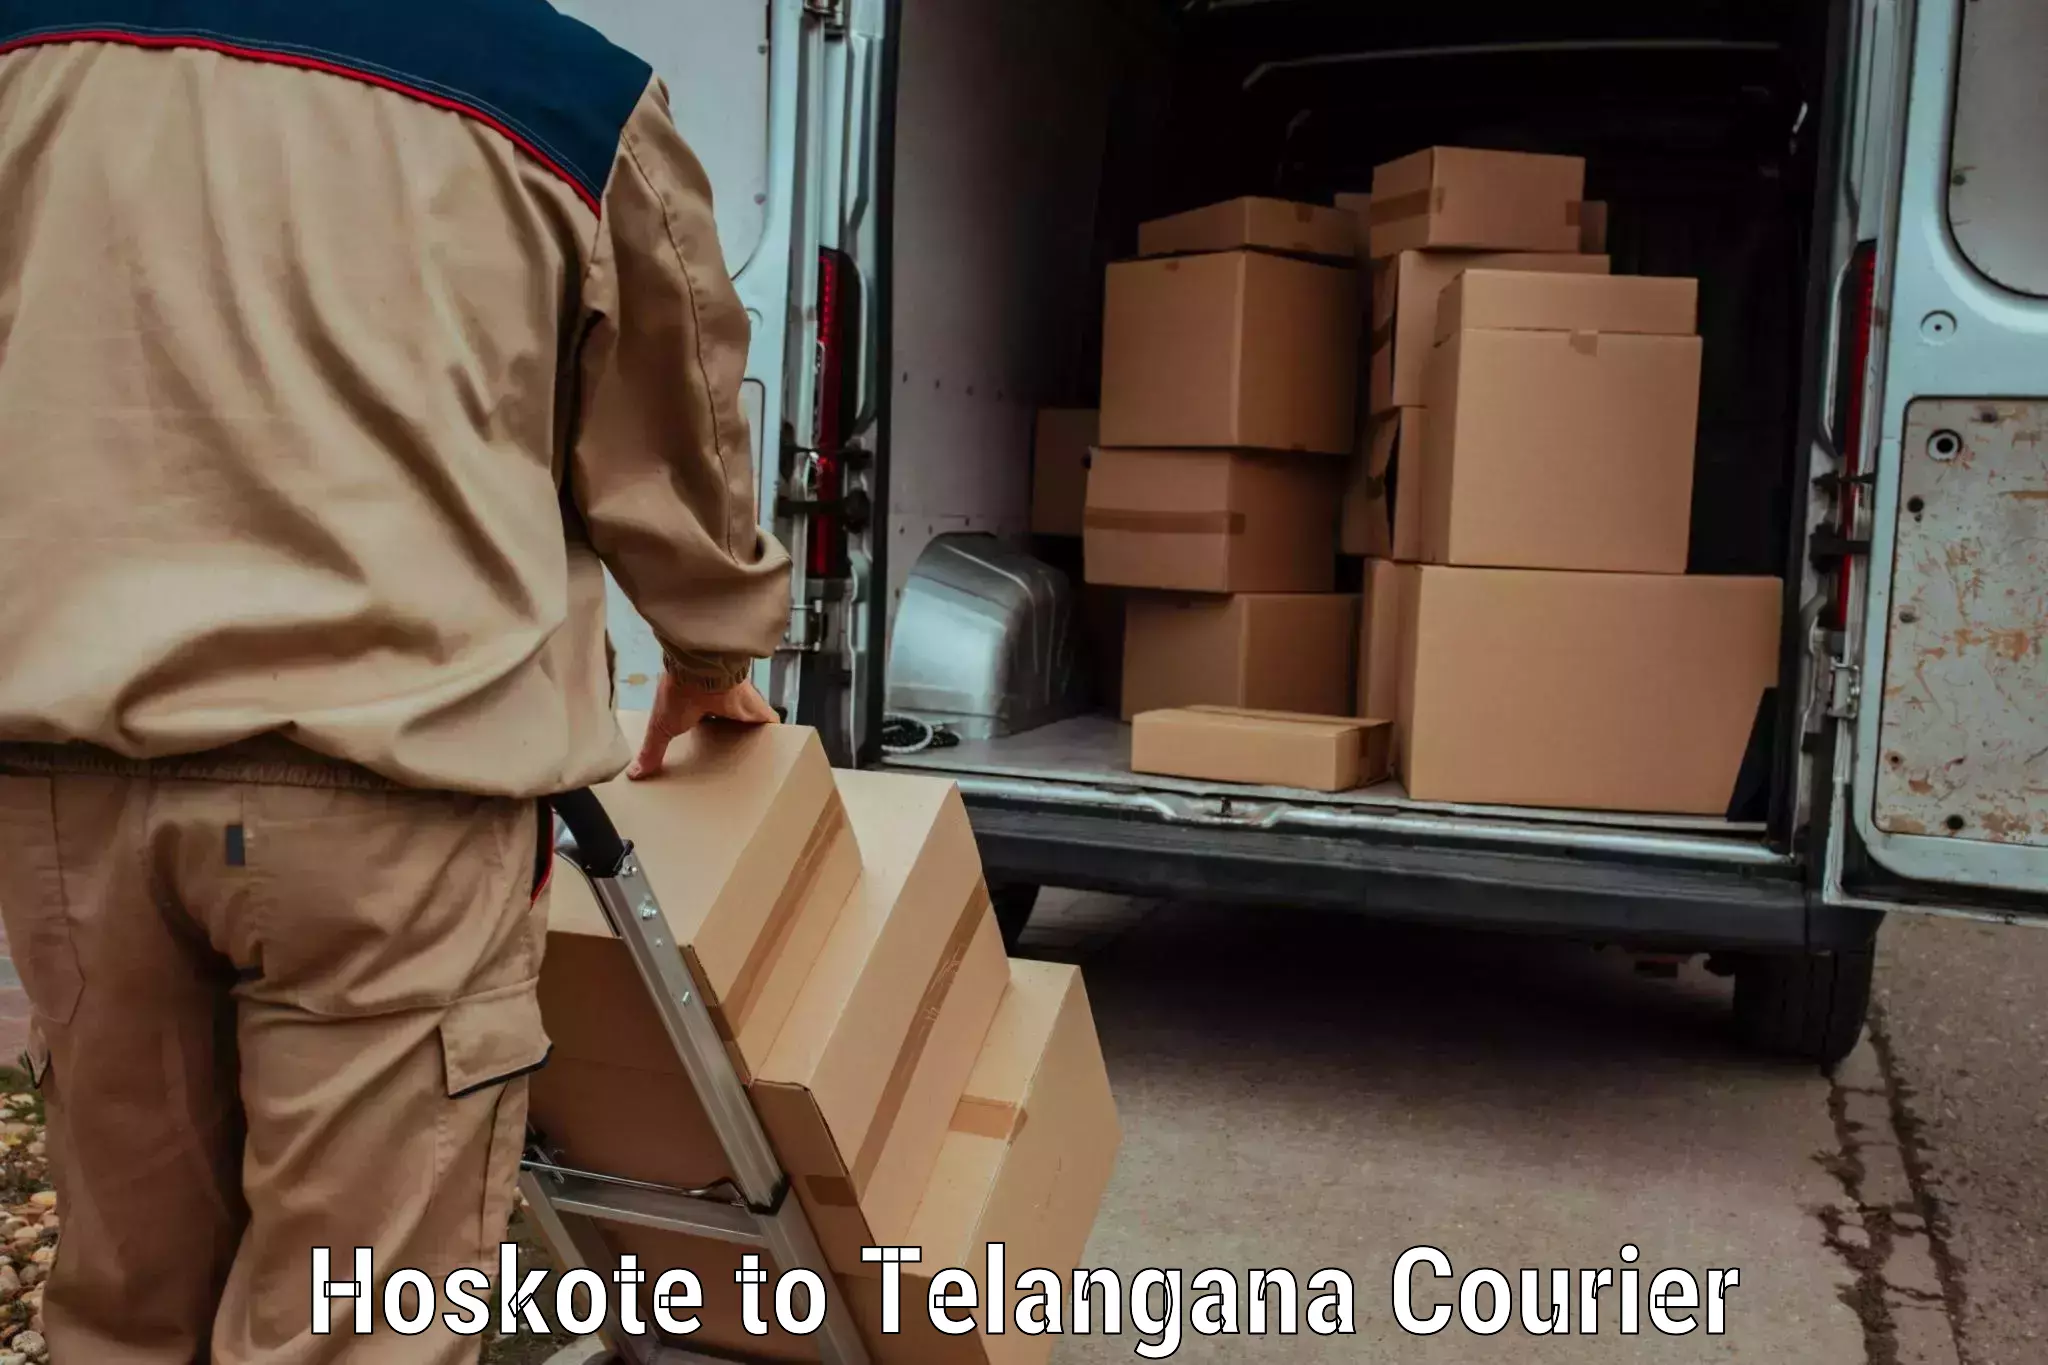 On-demand delivery in Hoskote to Bhadrachalam